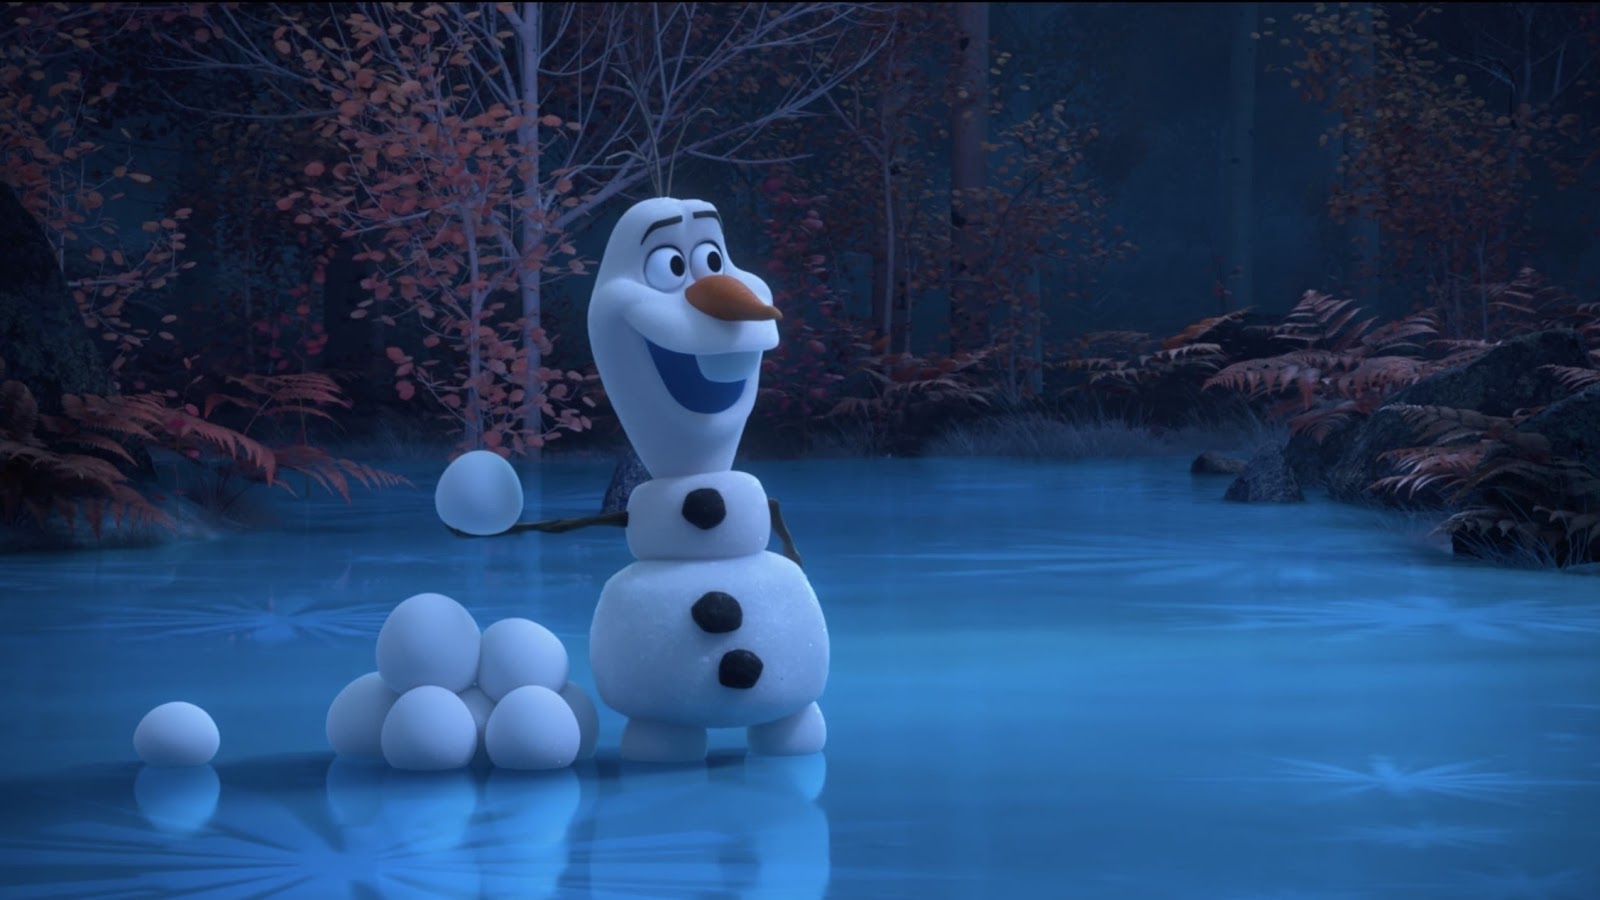 a new digital series titled At Home With Olaf, featuring the beloved snowma...